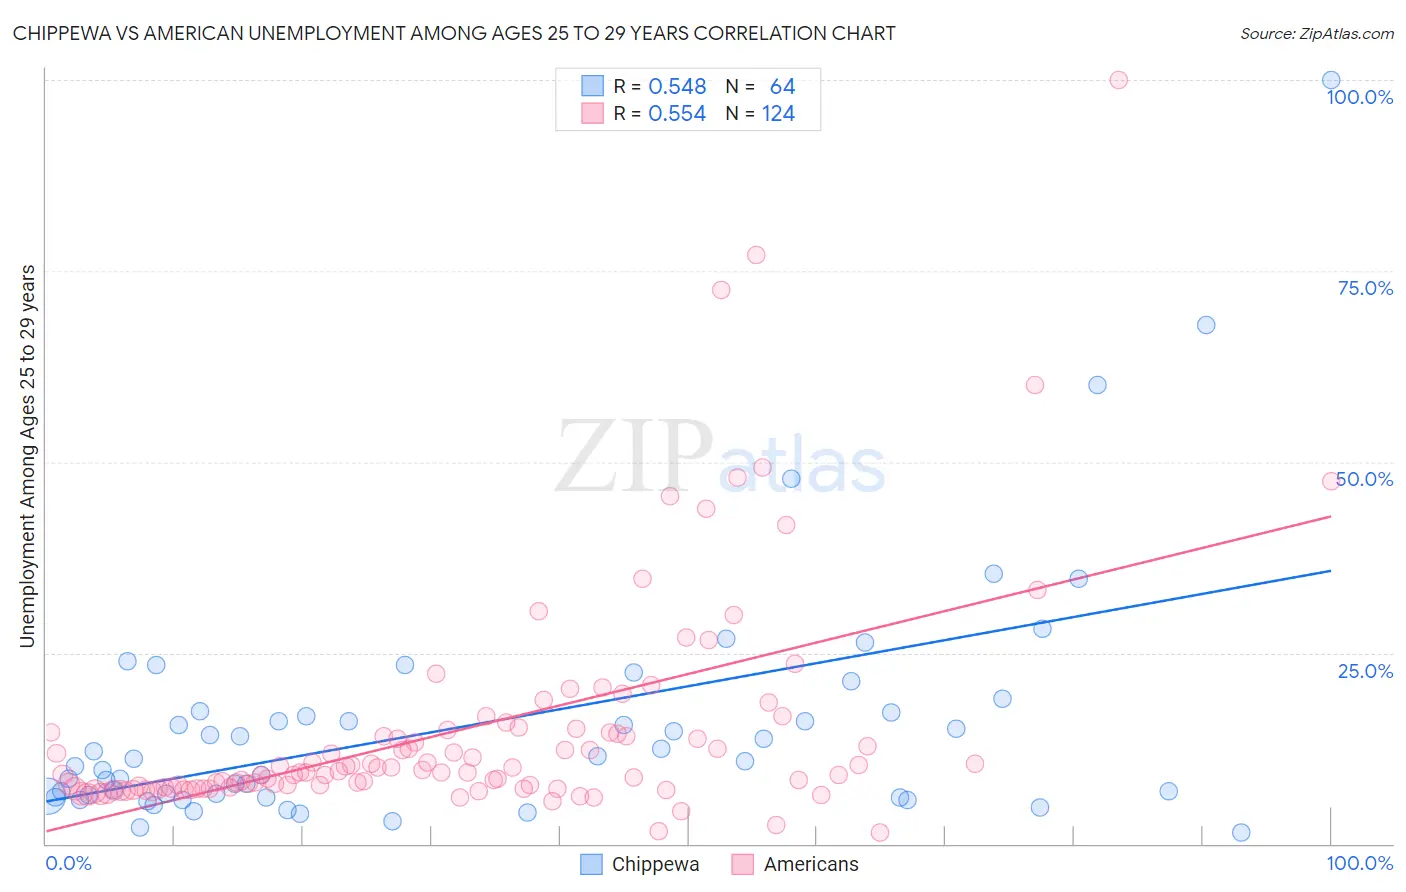 Chippewa vs American Unemployment Among Ages 25 to 29 years